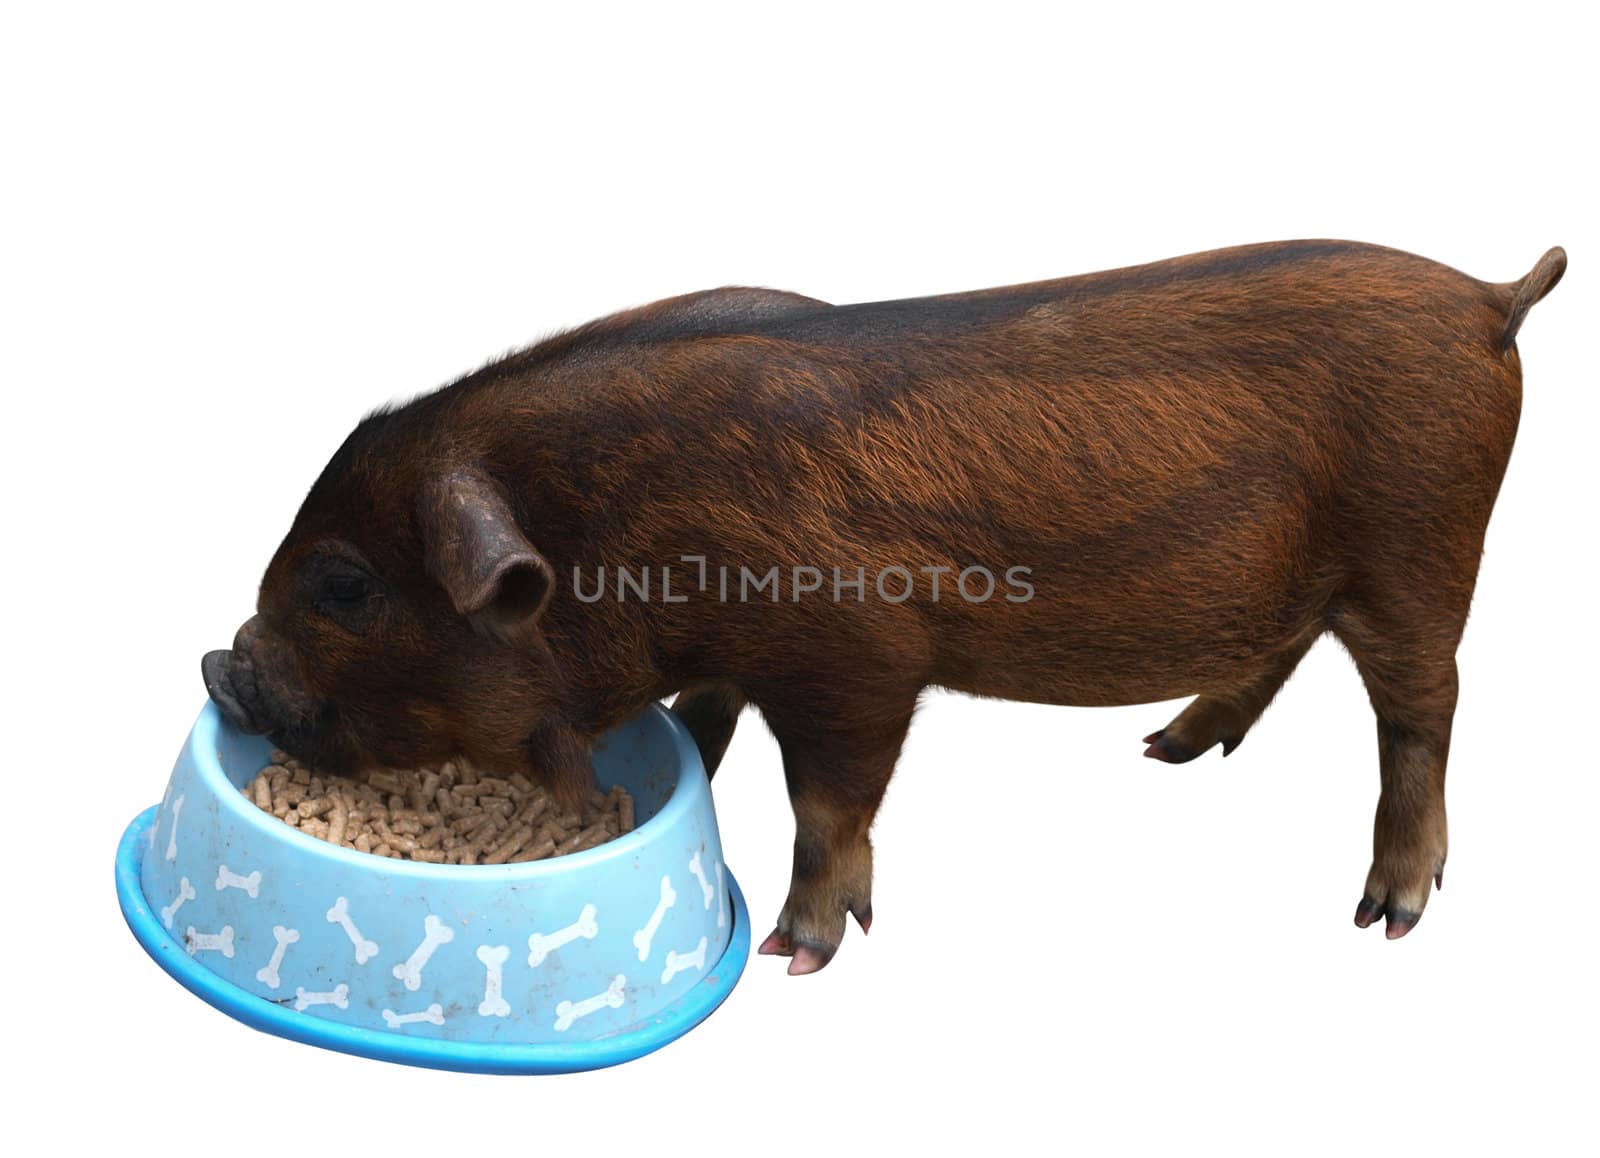 Lady Gruntsalot, a Kune kune Pig eating from a bowl by MargoJH